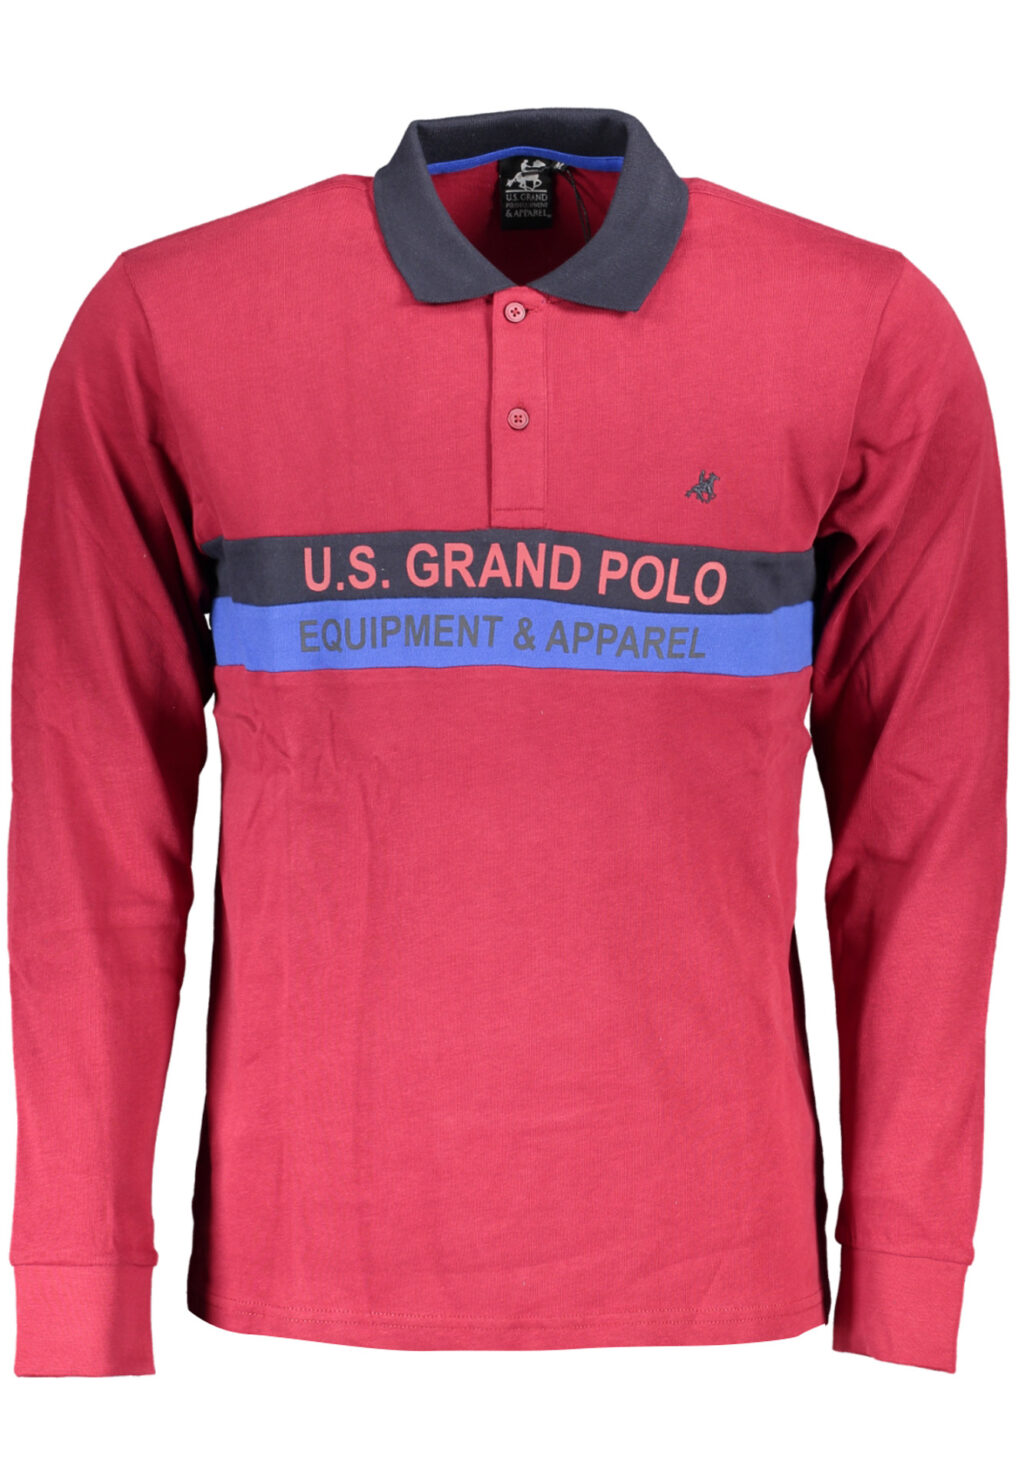 US GRAND POLO MEN'S LONG SLEEVED POLO SHIRT RED USP878_ROROSSO